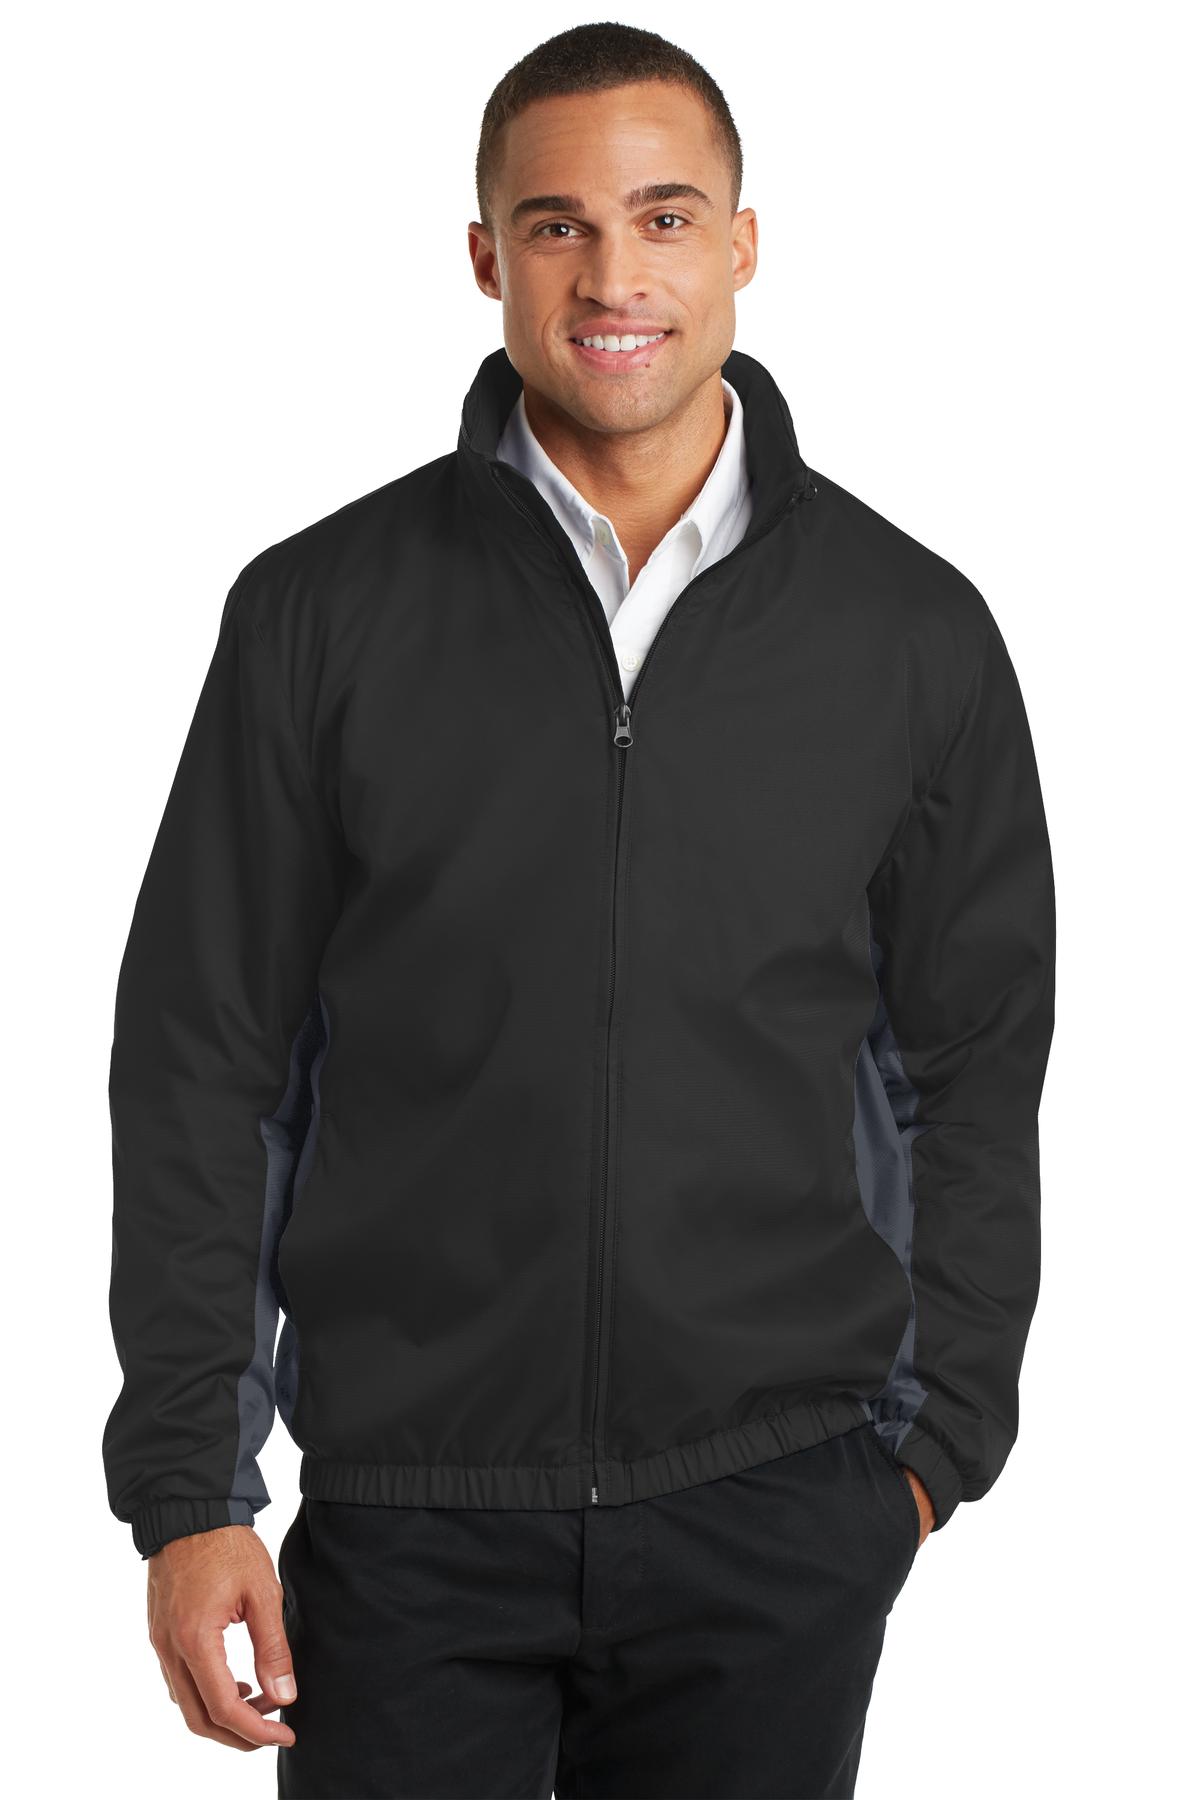 Port Authority Hospitality Outerwear ® Core Colorblock Wind Jacket.-Port Authority